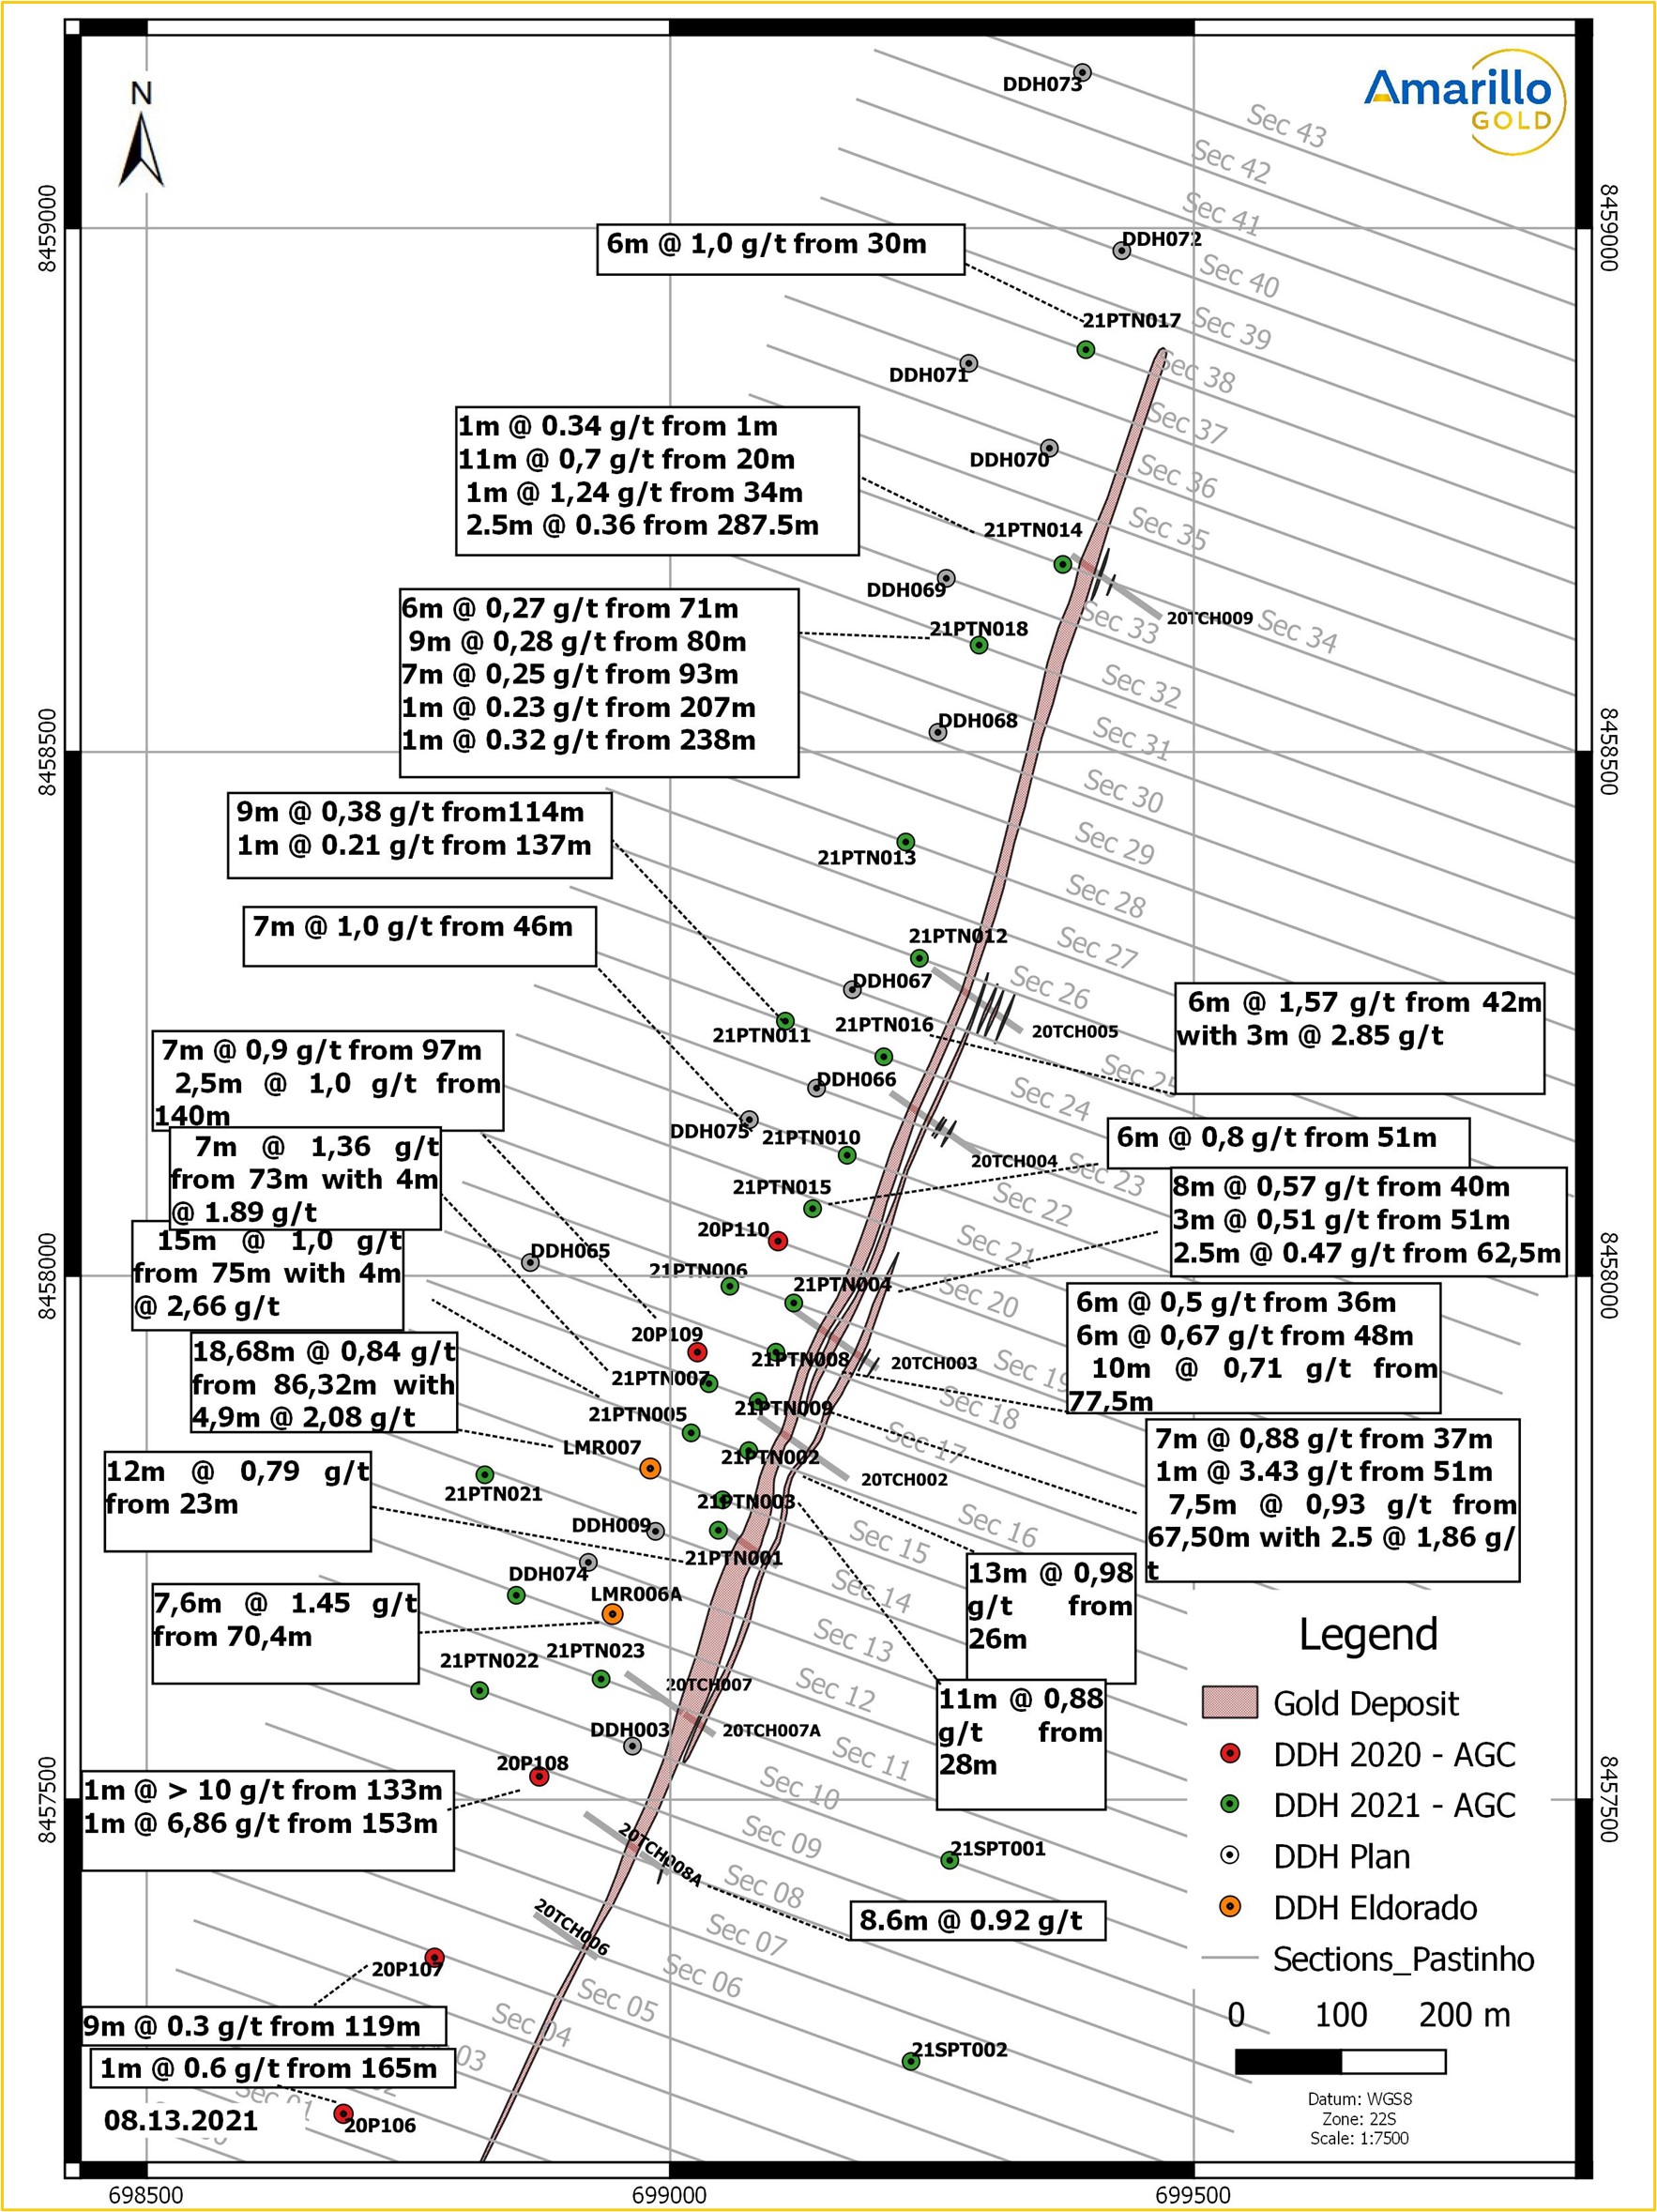 FIGURE 1: PLAN MAP SHOWING DRILL HOLE LOCATIONS AND ASSAY RESULTS FOR PASTINHO GOLD DEPOSIT